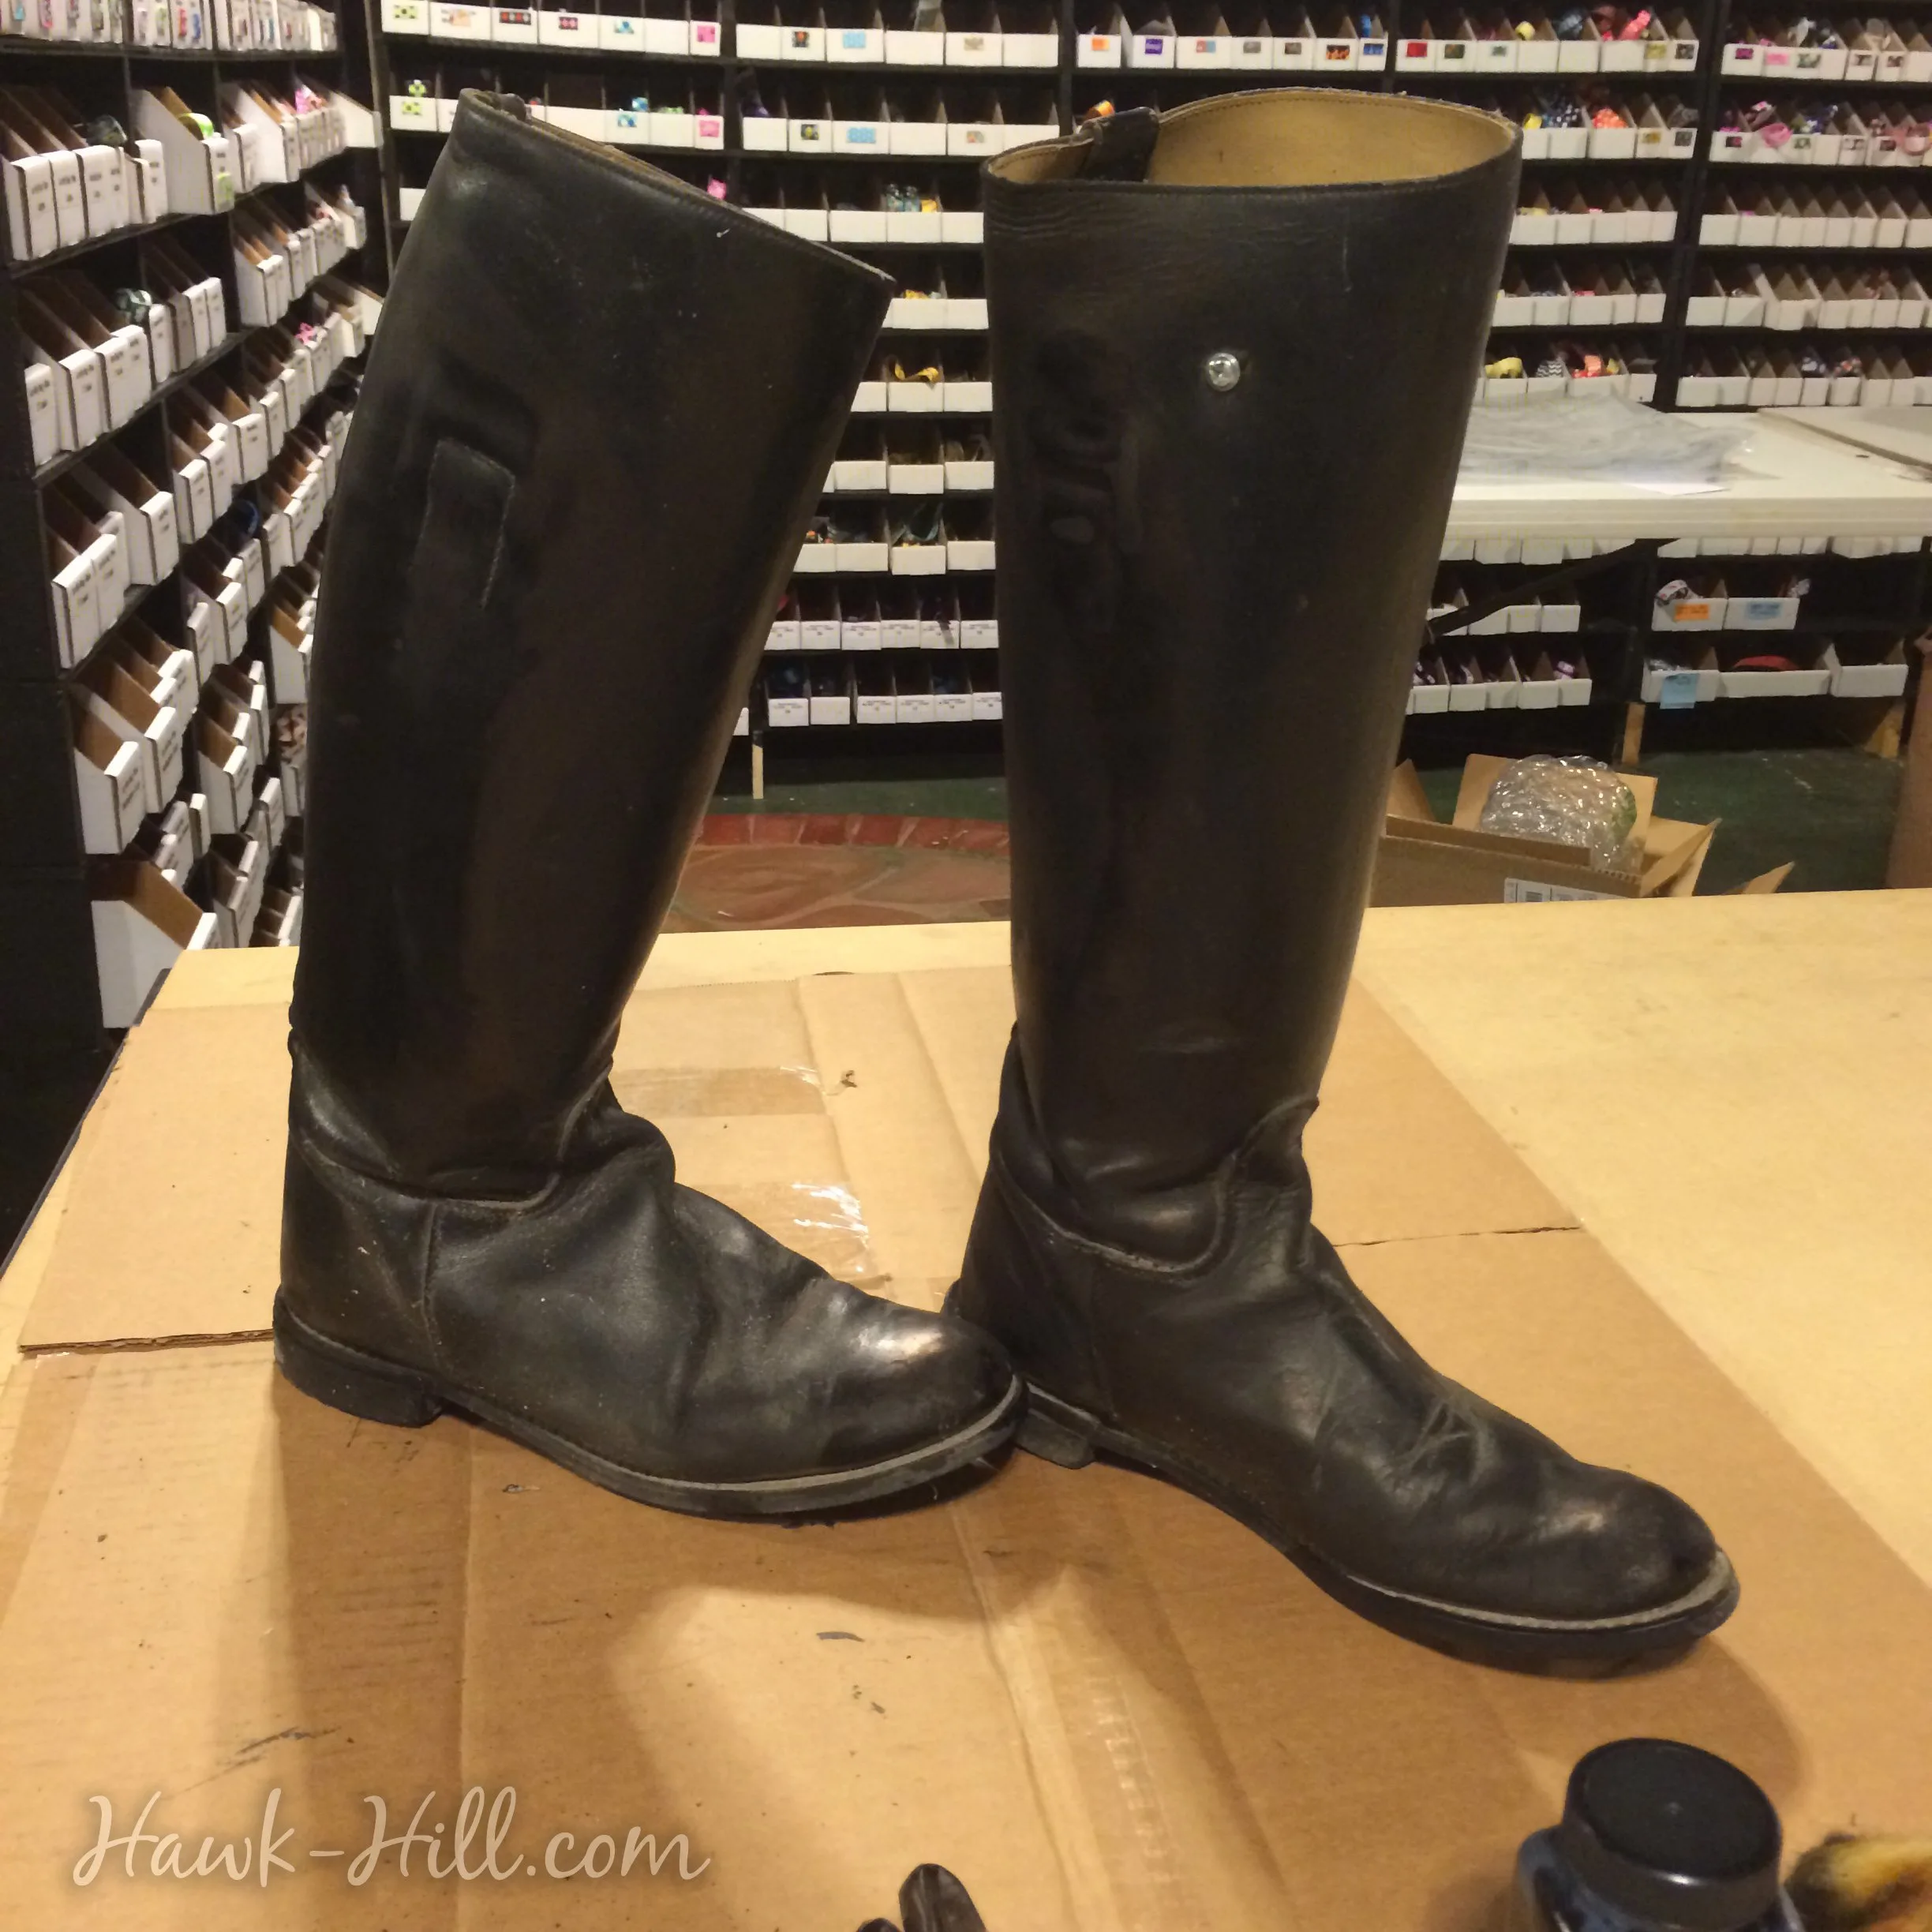 Worn leather riding boots looking new with an application of dye.